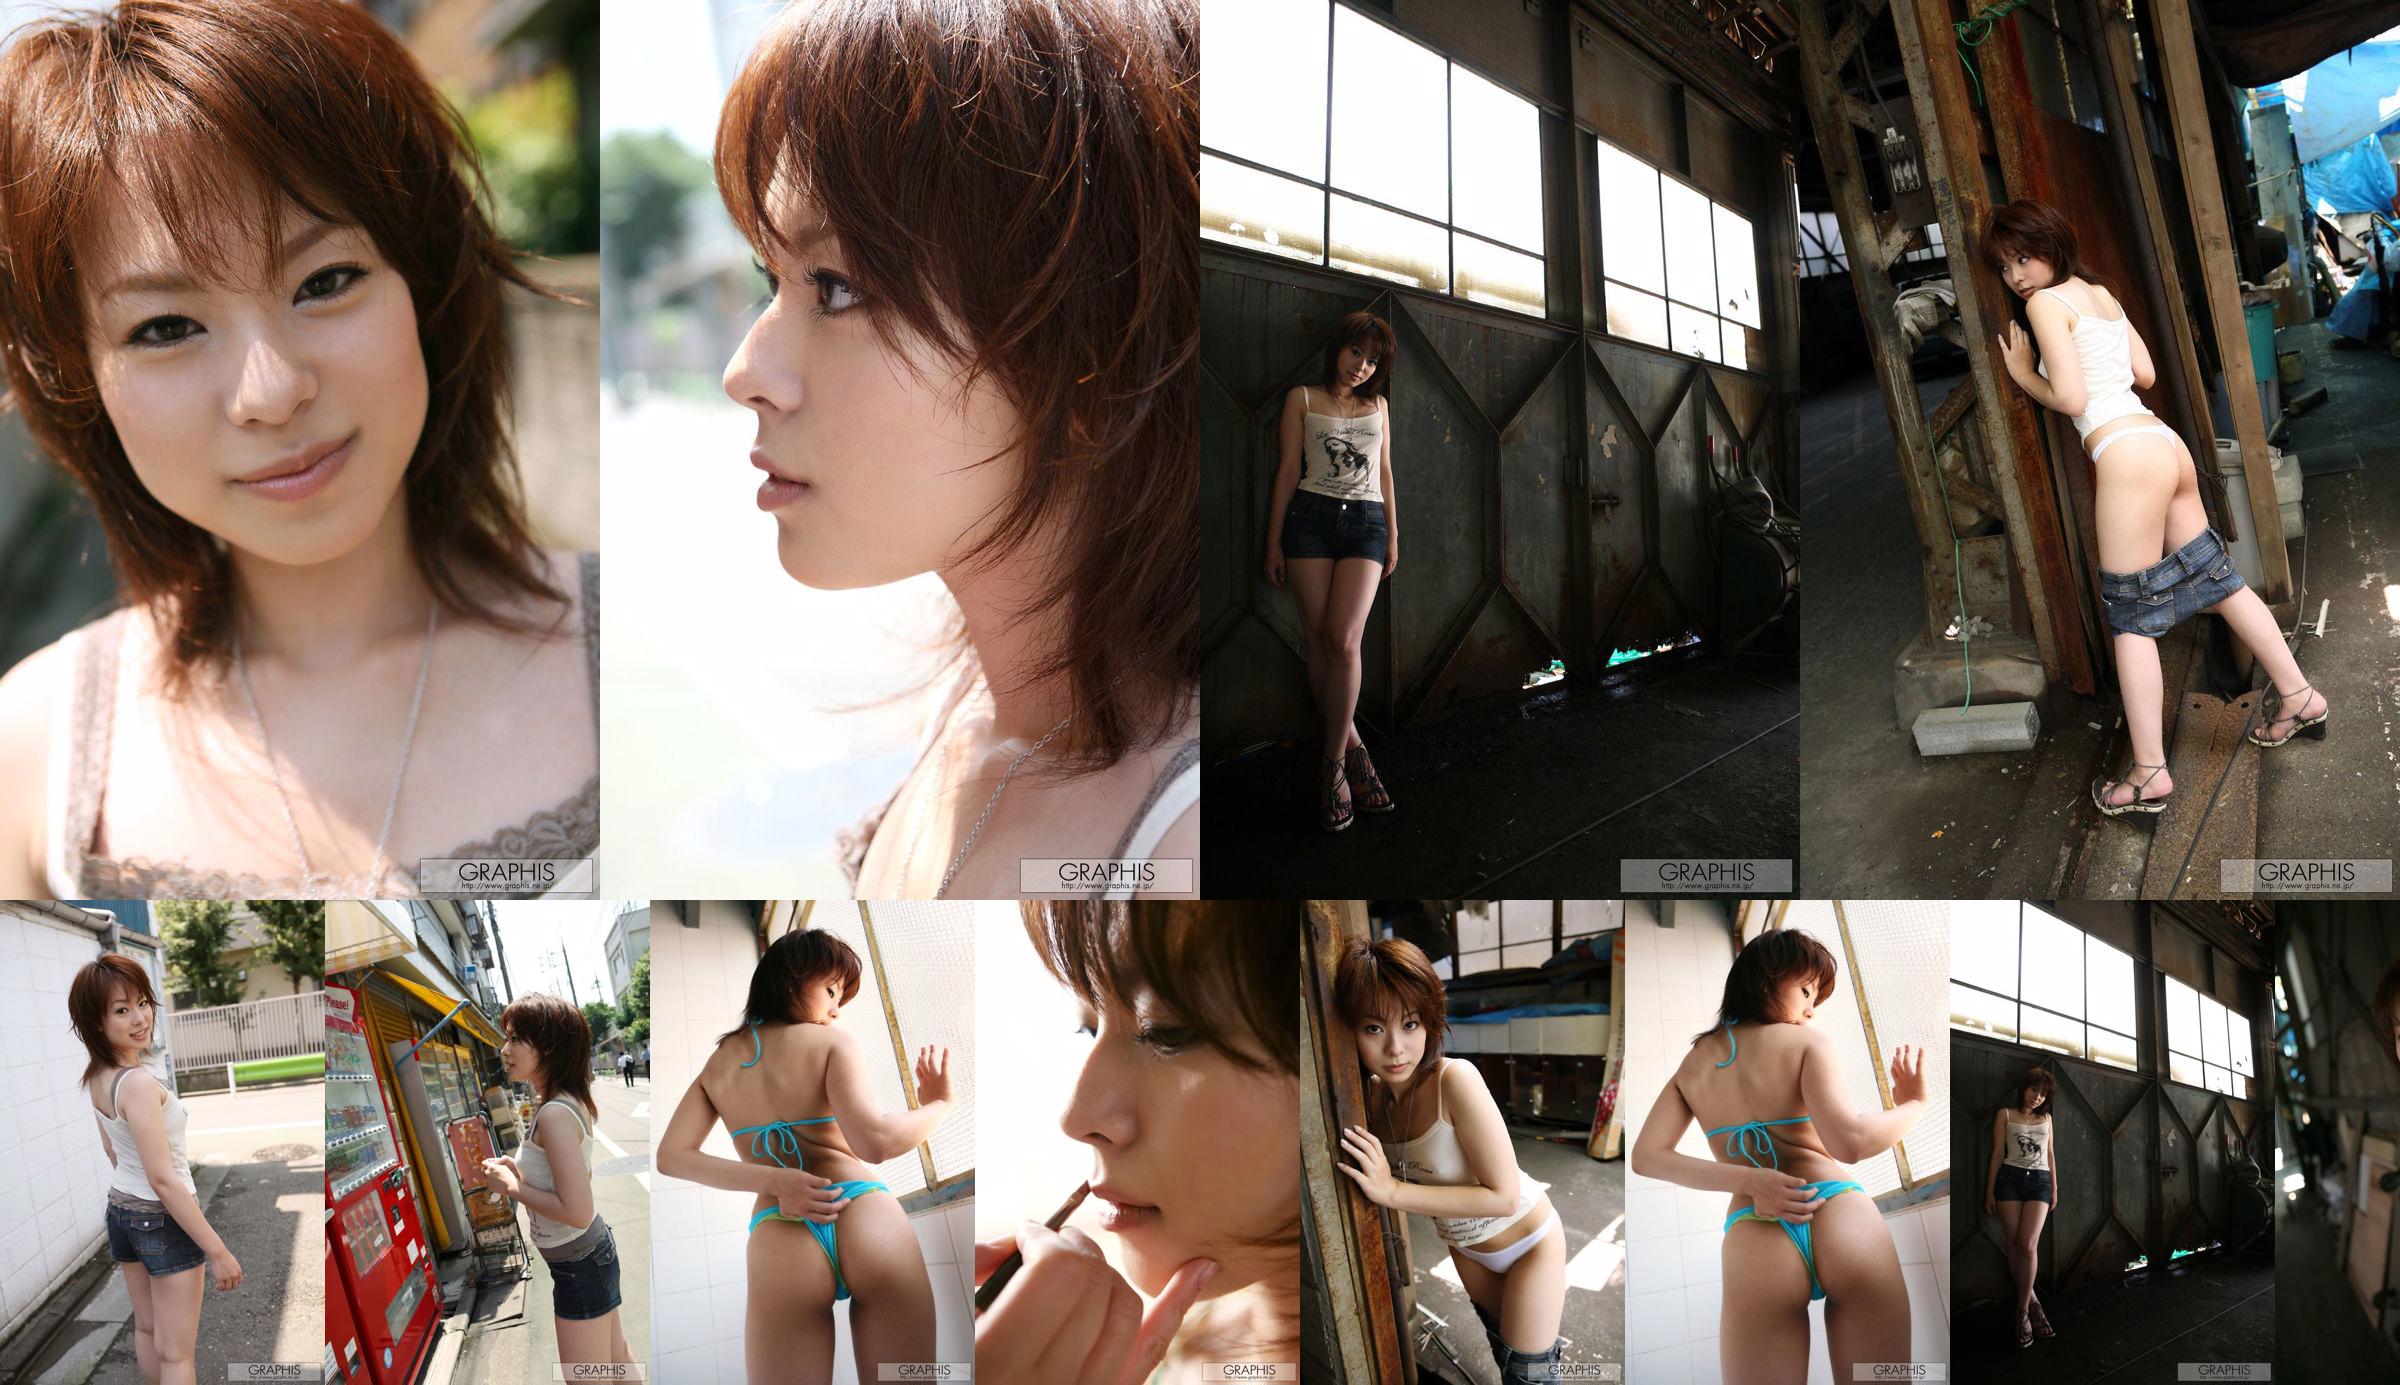 Mina Manabe Mina Manabe [Graphis] First Gravure First Take Off Daughter No.d8559f Page 2